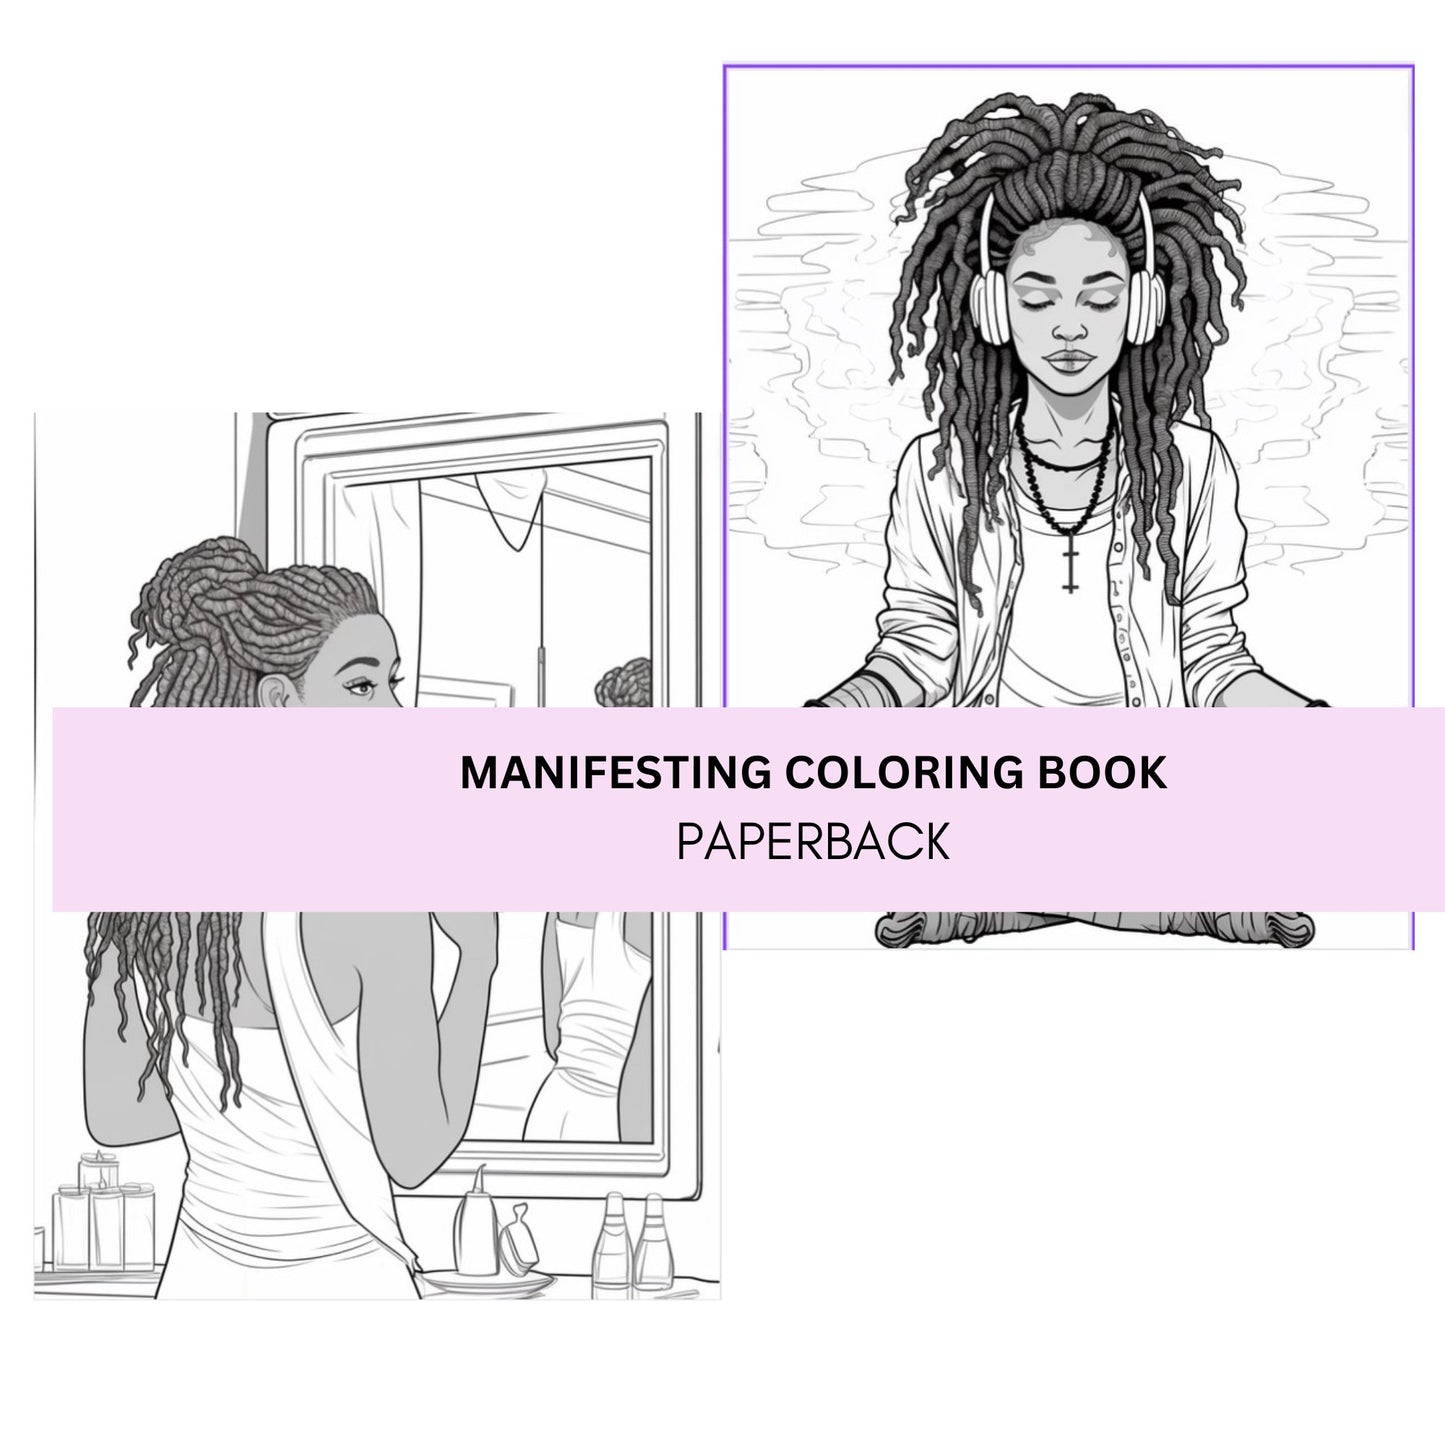 Manifesting Color An Adult Coloring Book with Self Love Affirmations PAPERBACK - manifesting with anxiety